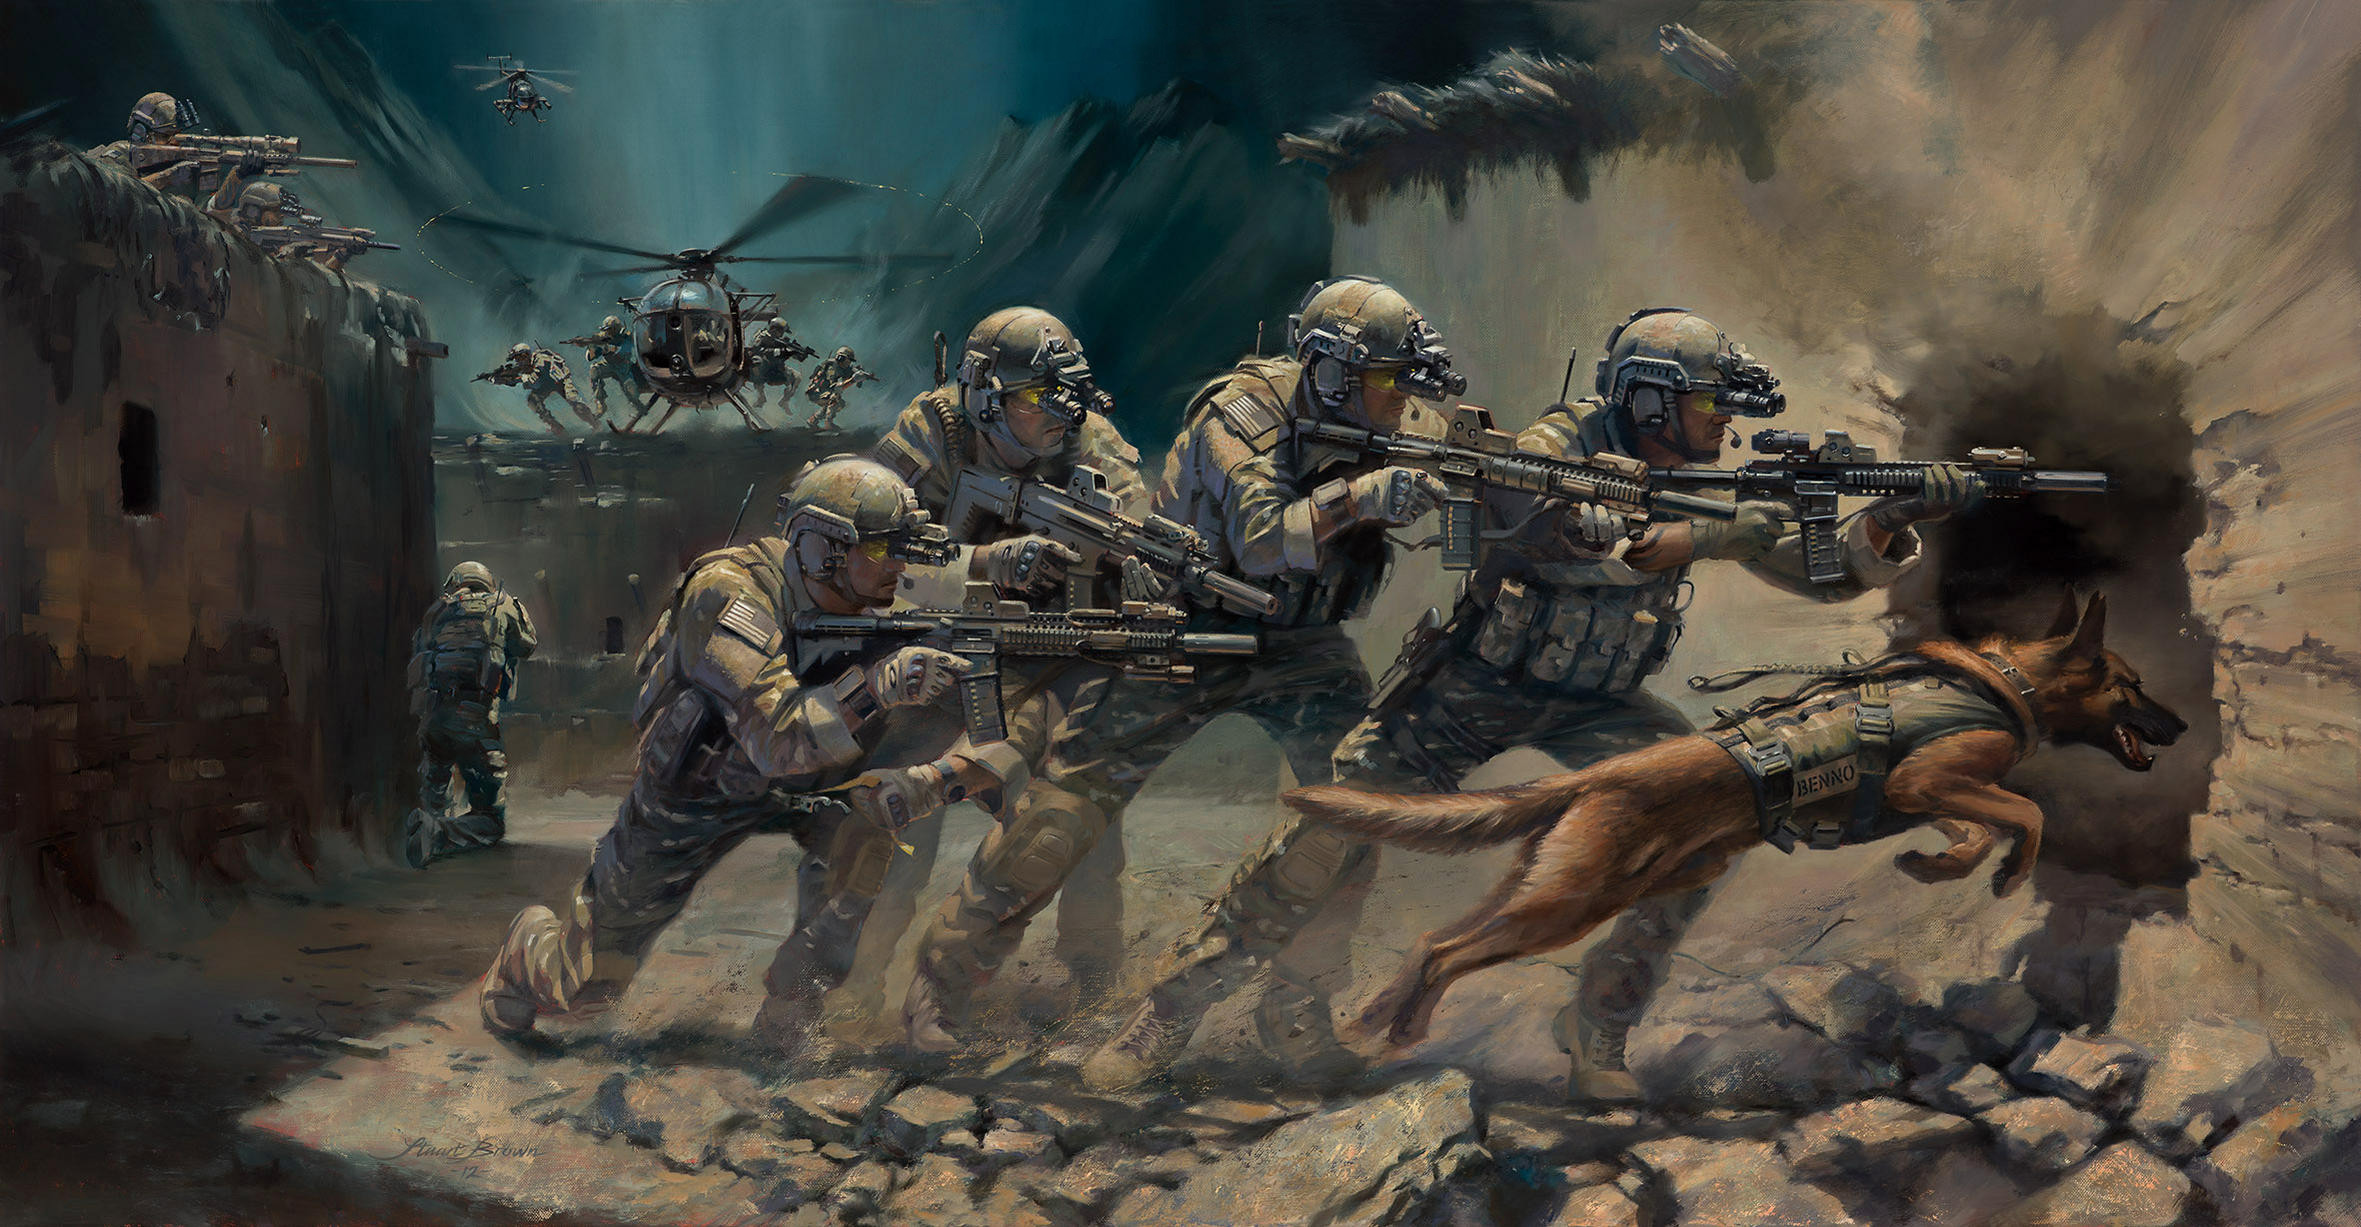 2361x1227 Download wallpaper art, soldiers, special forces, assault rifles, weapons,  equipment,